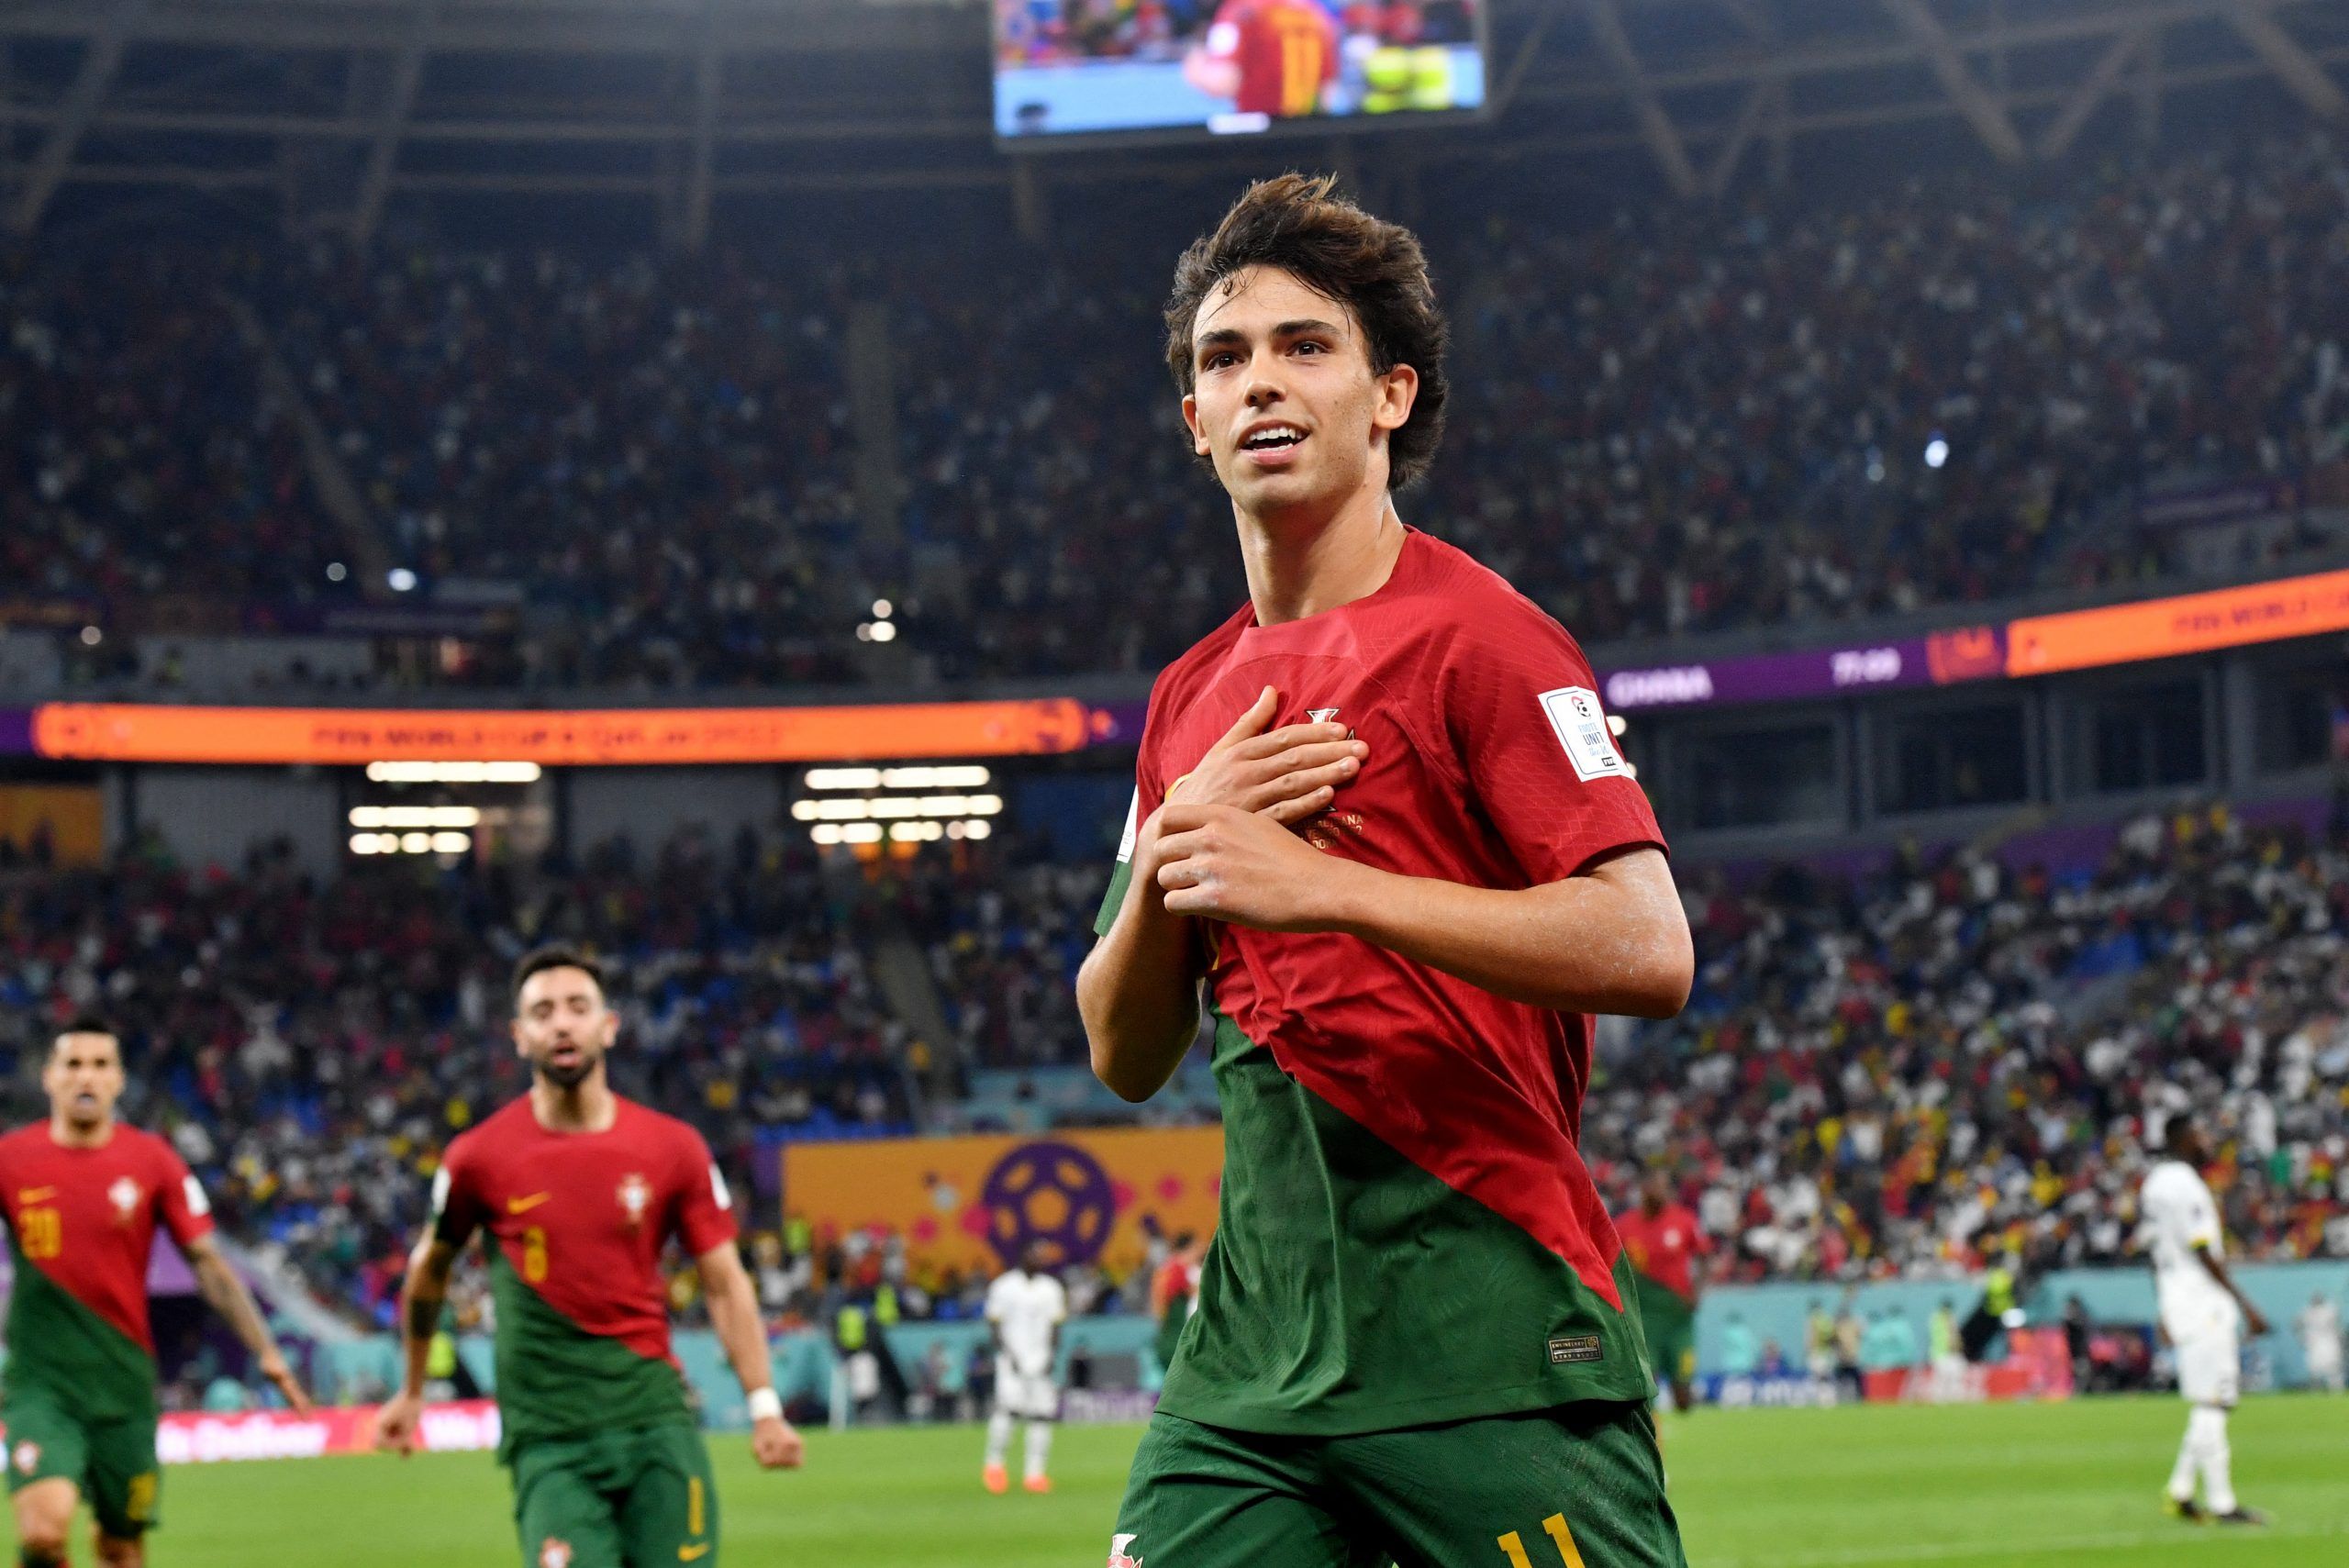 joao-felix-portugal-world-cup-manchester-united-scaled.jpg